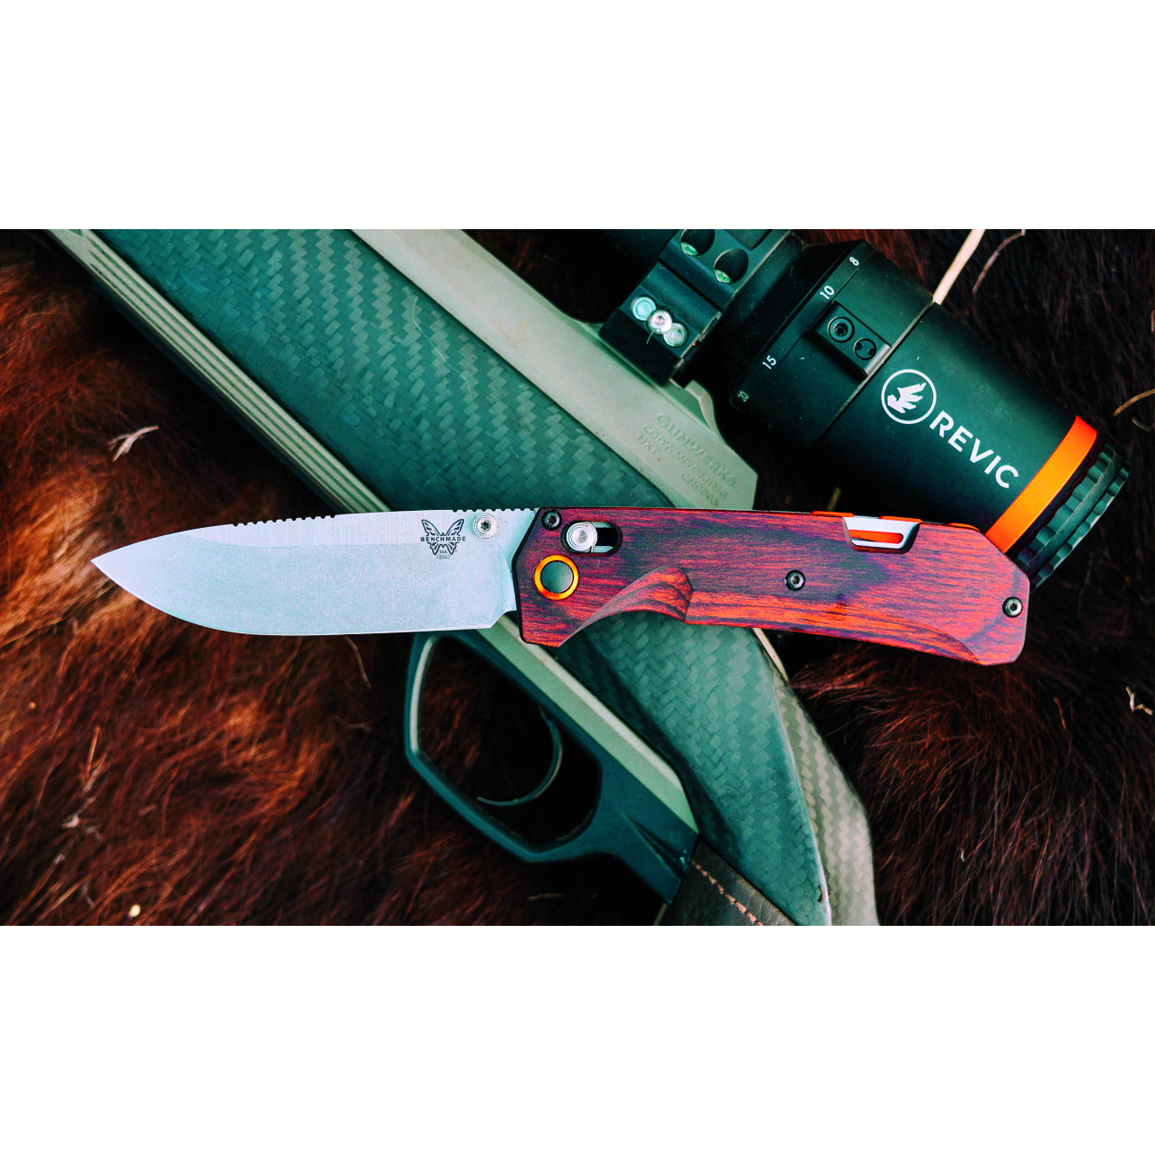 Benchmade Grizzly Creek 15062 Hunting Folding Knife